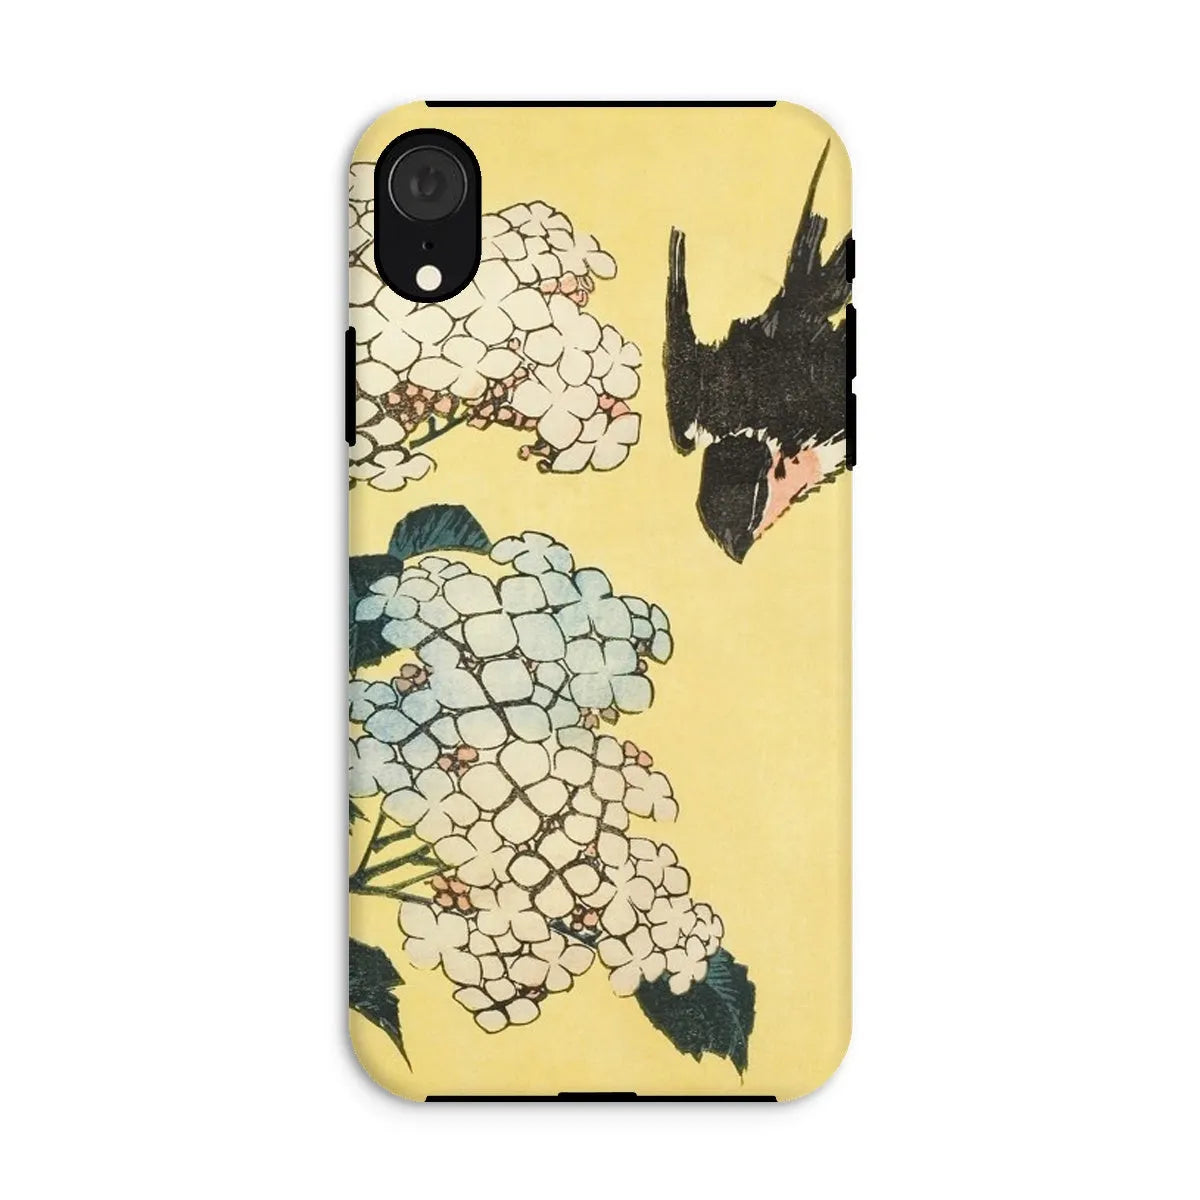 Hydrangea And Swallow - Japanese Art Phone Case - Hokusai - Iphone Xr / Matte - Mobile Phone Cases - Aesthetic Art